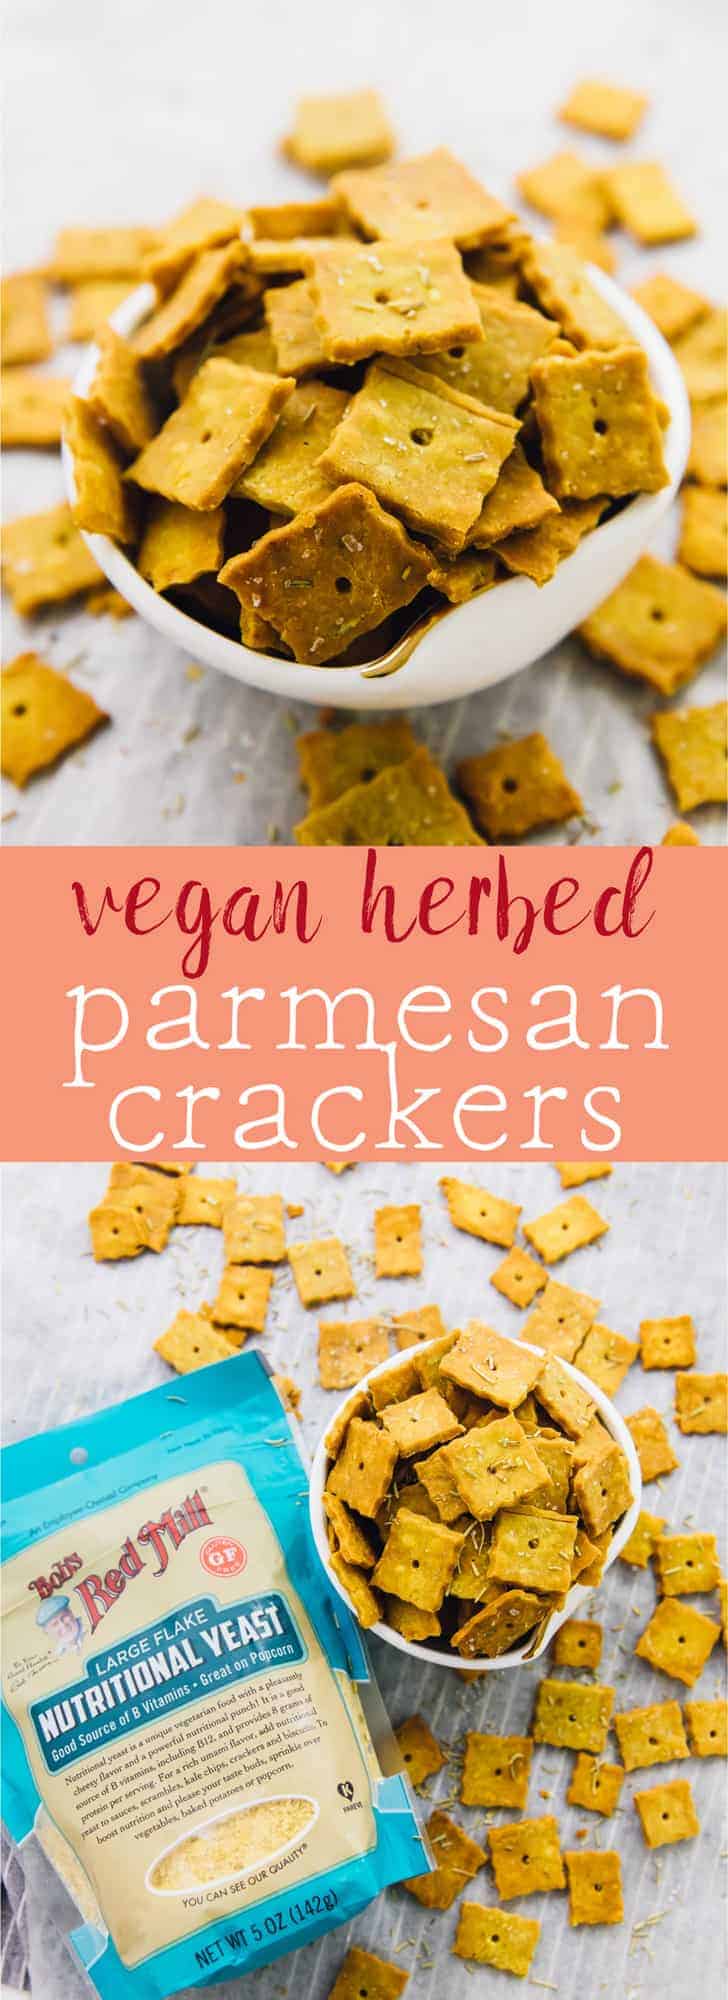 These Vegan Herbed Parmesan Crackers are done in 30 minutes! They are easy to make in one bowl, are crispy and flaky, and gluten free! via https://jessicainthekitchen.com